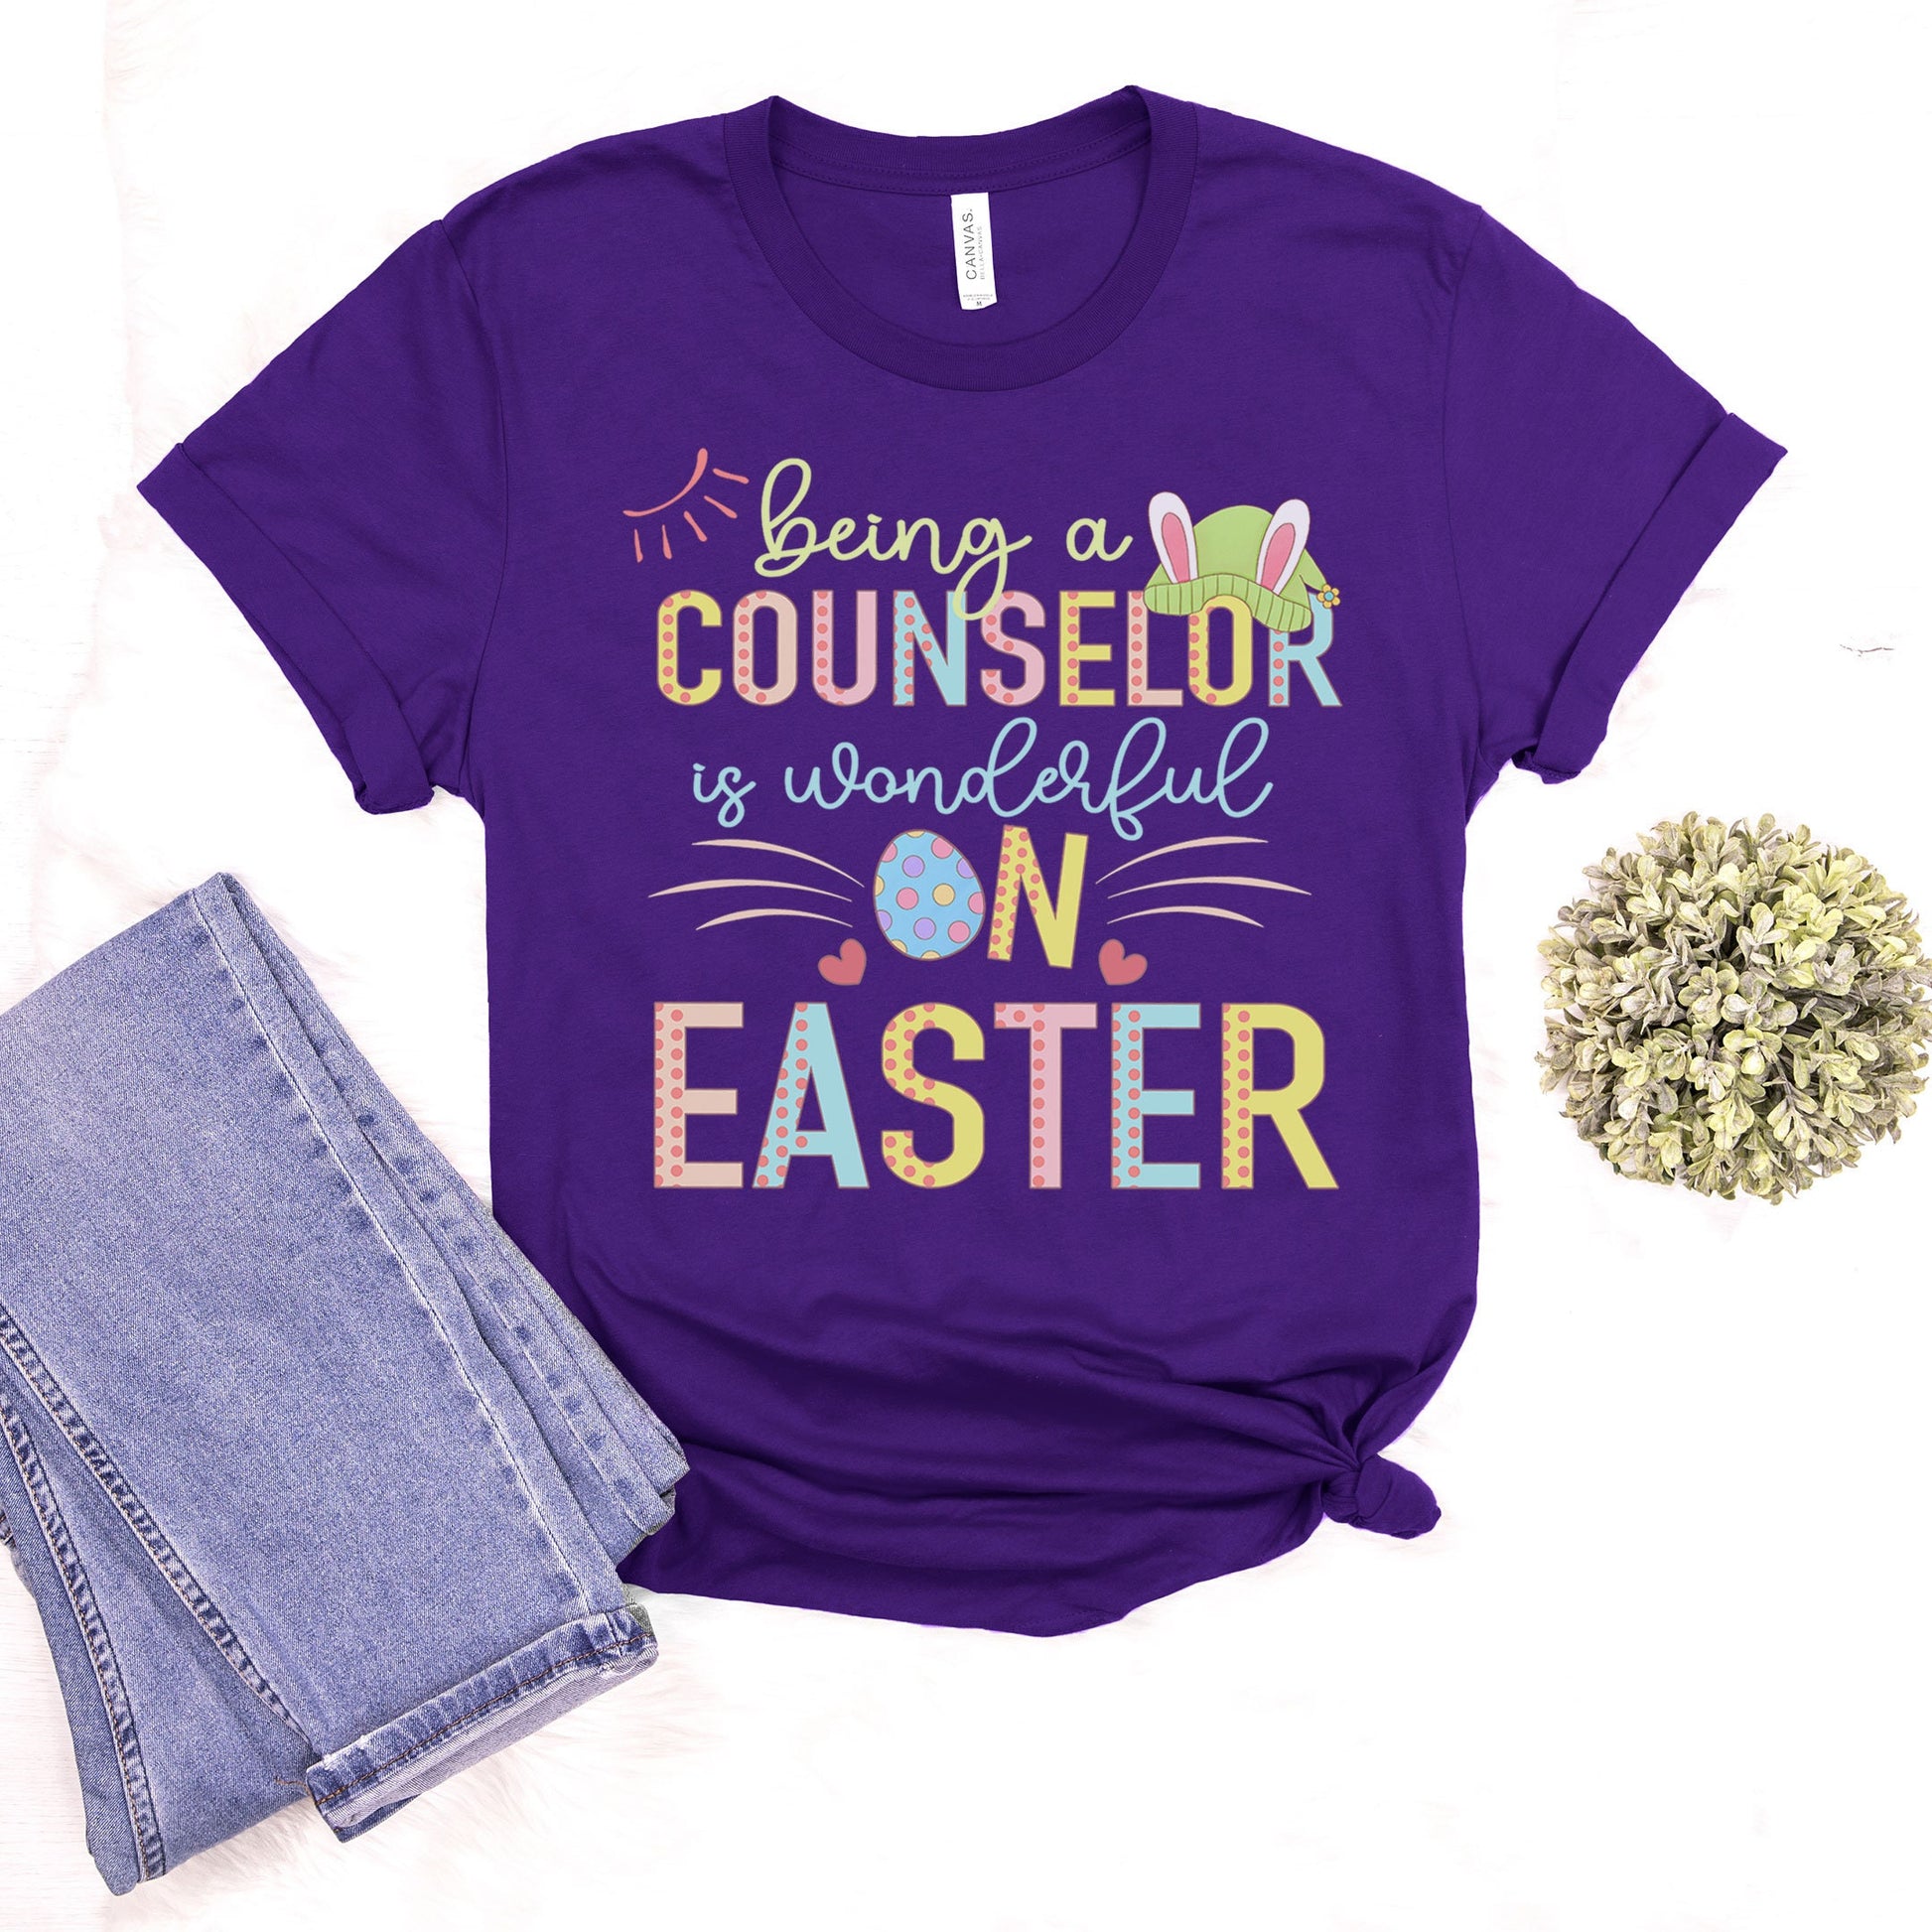 Being A Counselor Is Wonderful On Easter Shirt, Preschool Elementary School Hip Hop Easter Tee Admin Staff Guidance Counseling Office Gift